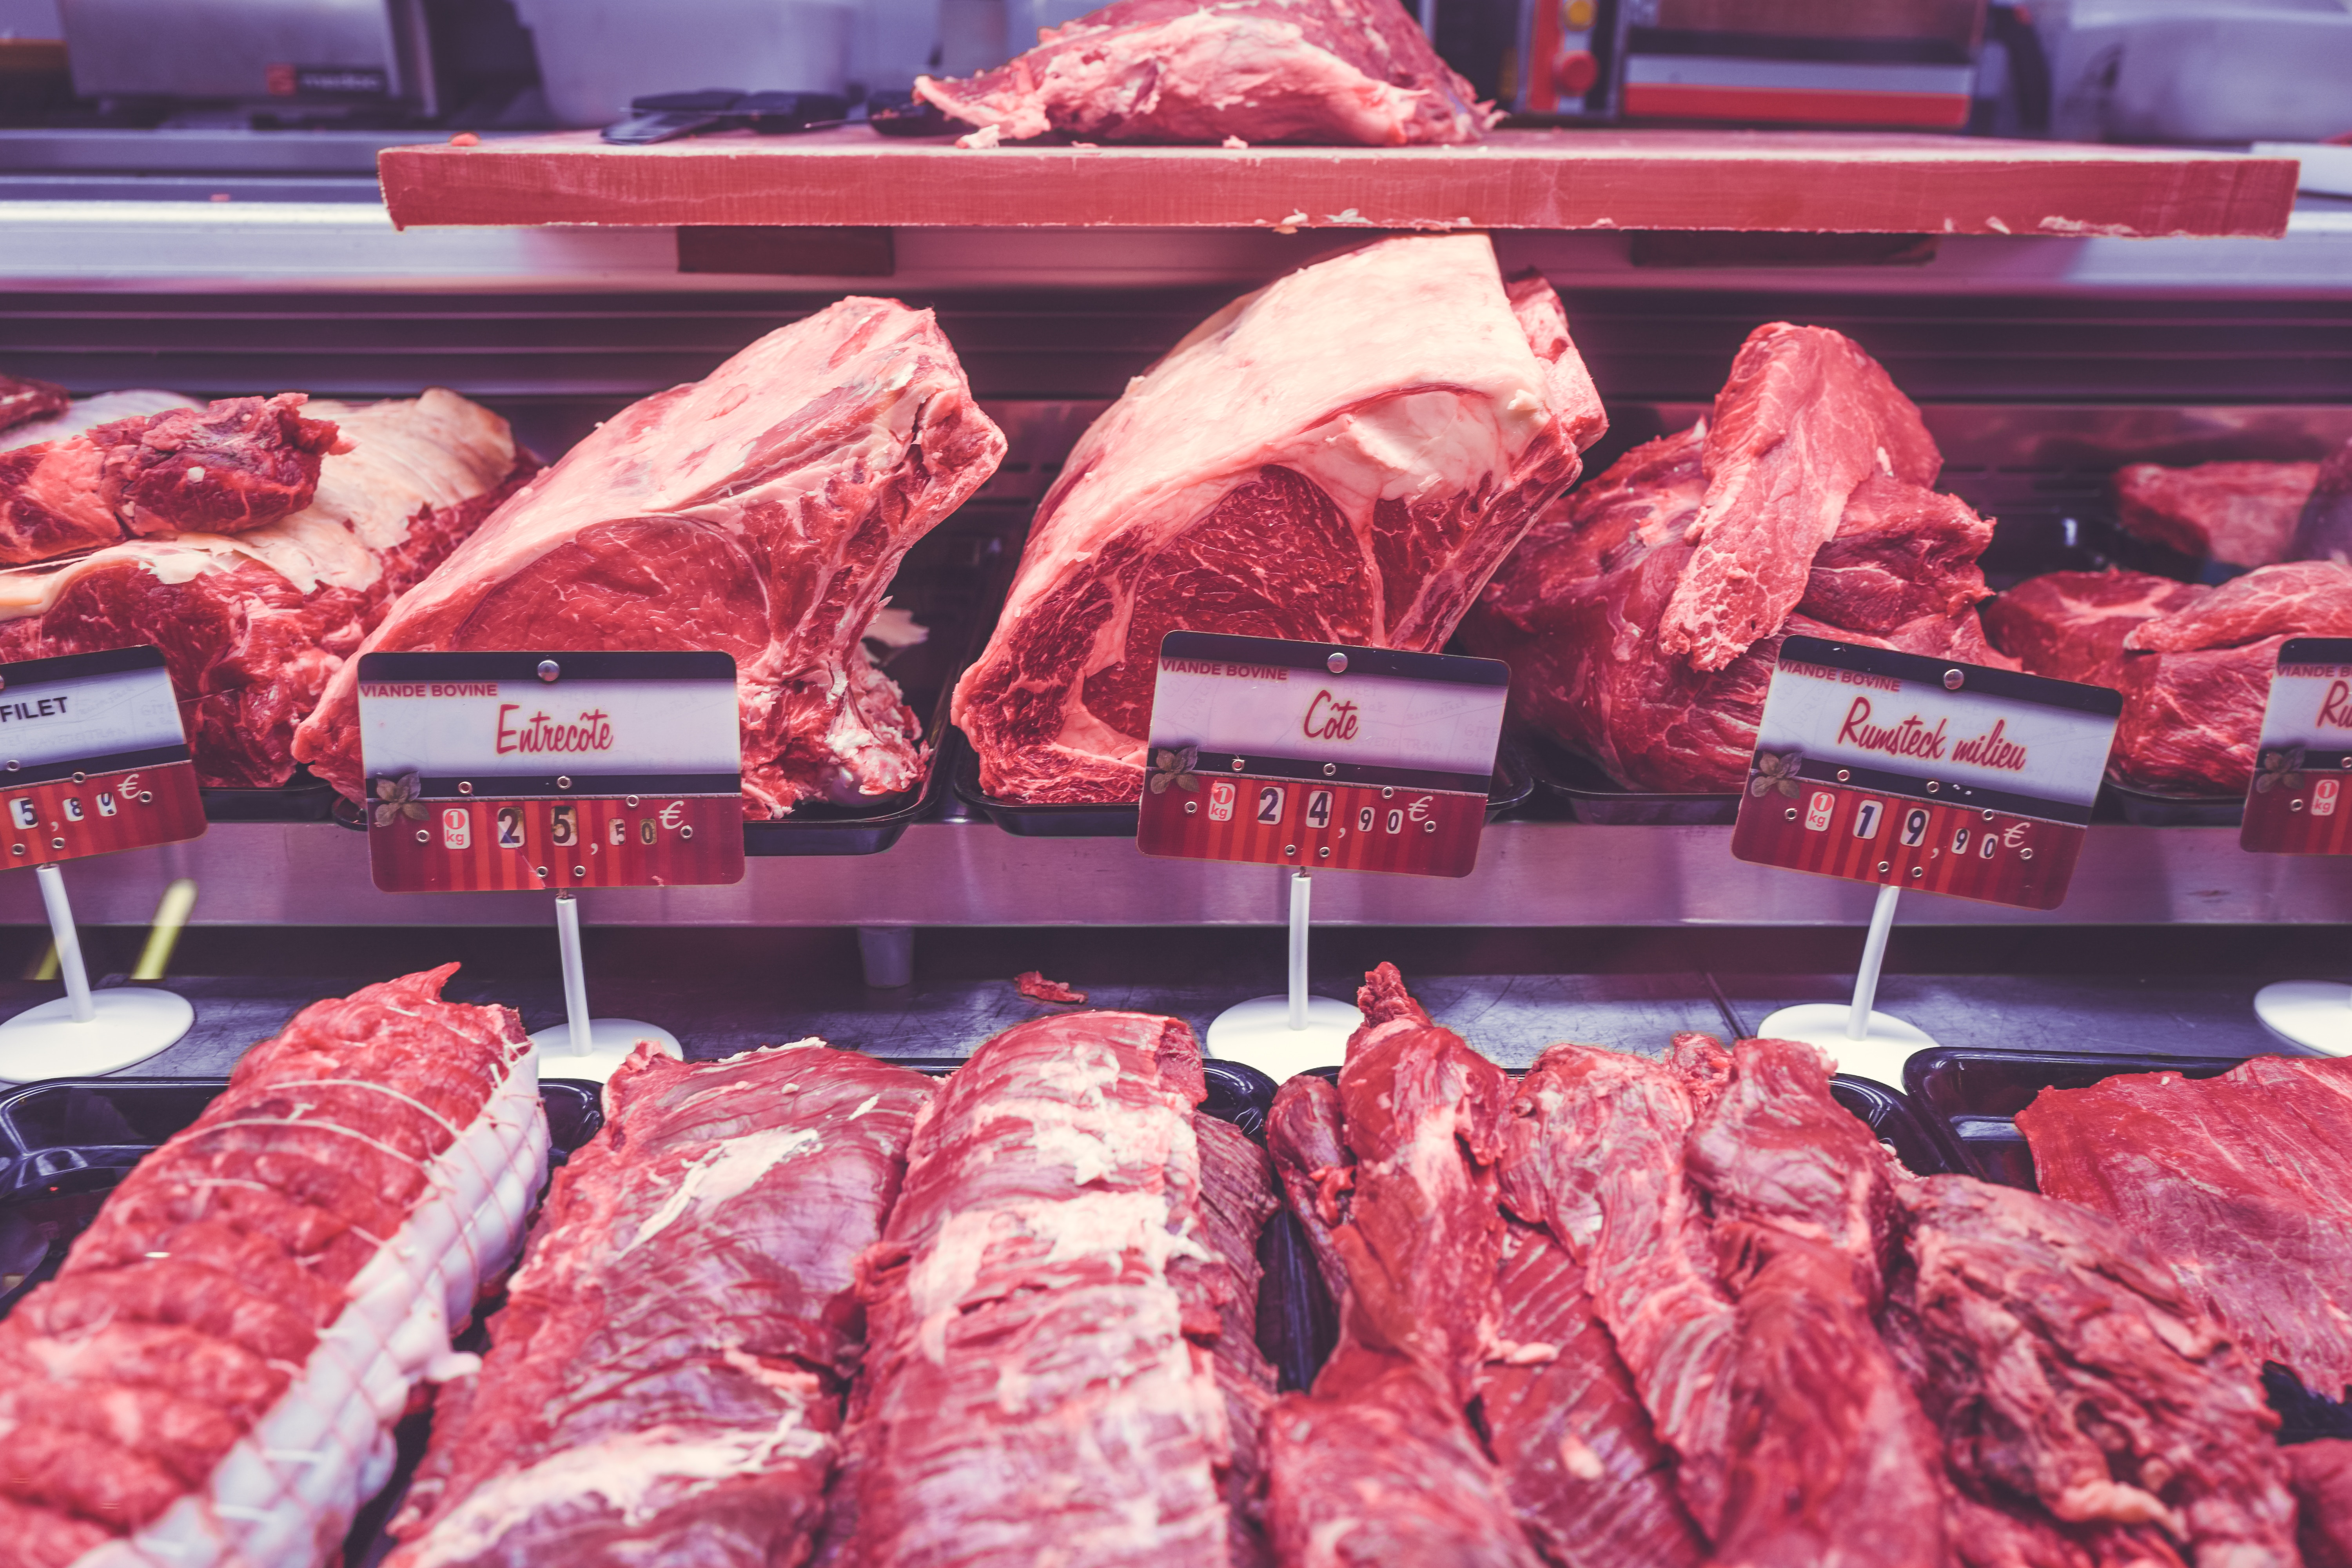 Raw meat in a butcher's case